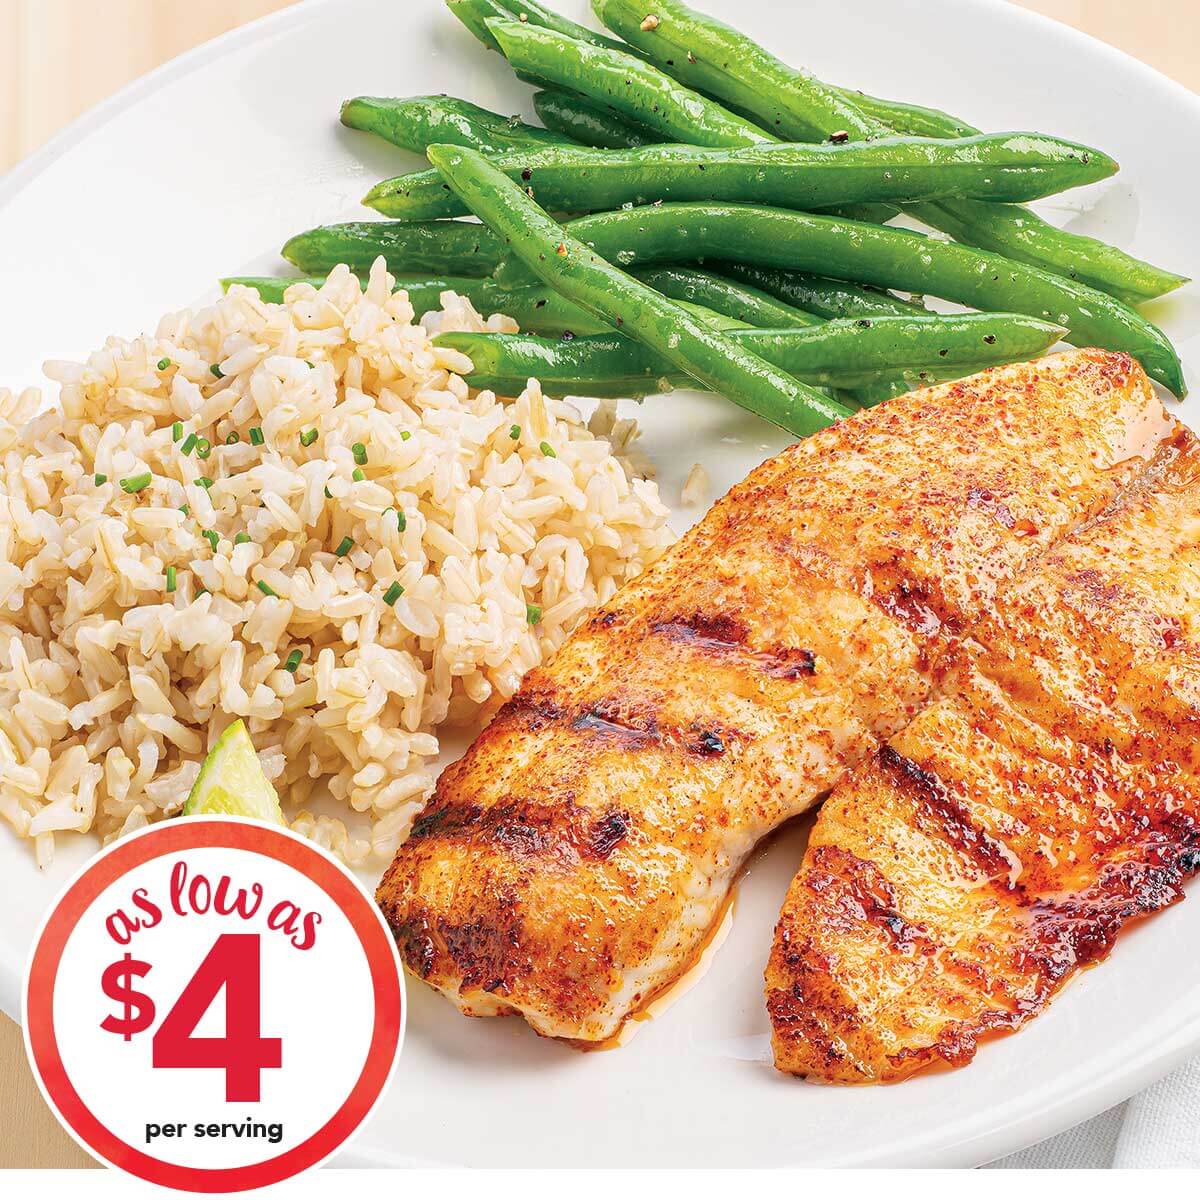 Grilled Chili Lime Tilapia with Green Beans & Brown Rice as low as $4.00 per serving